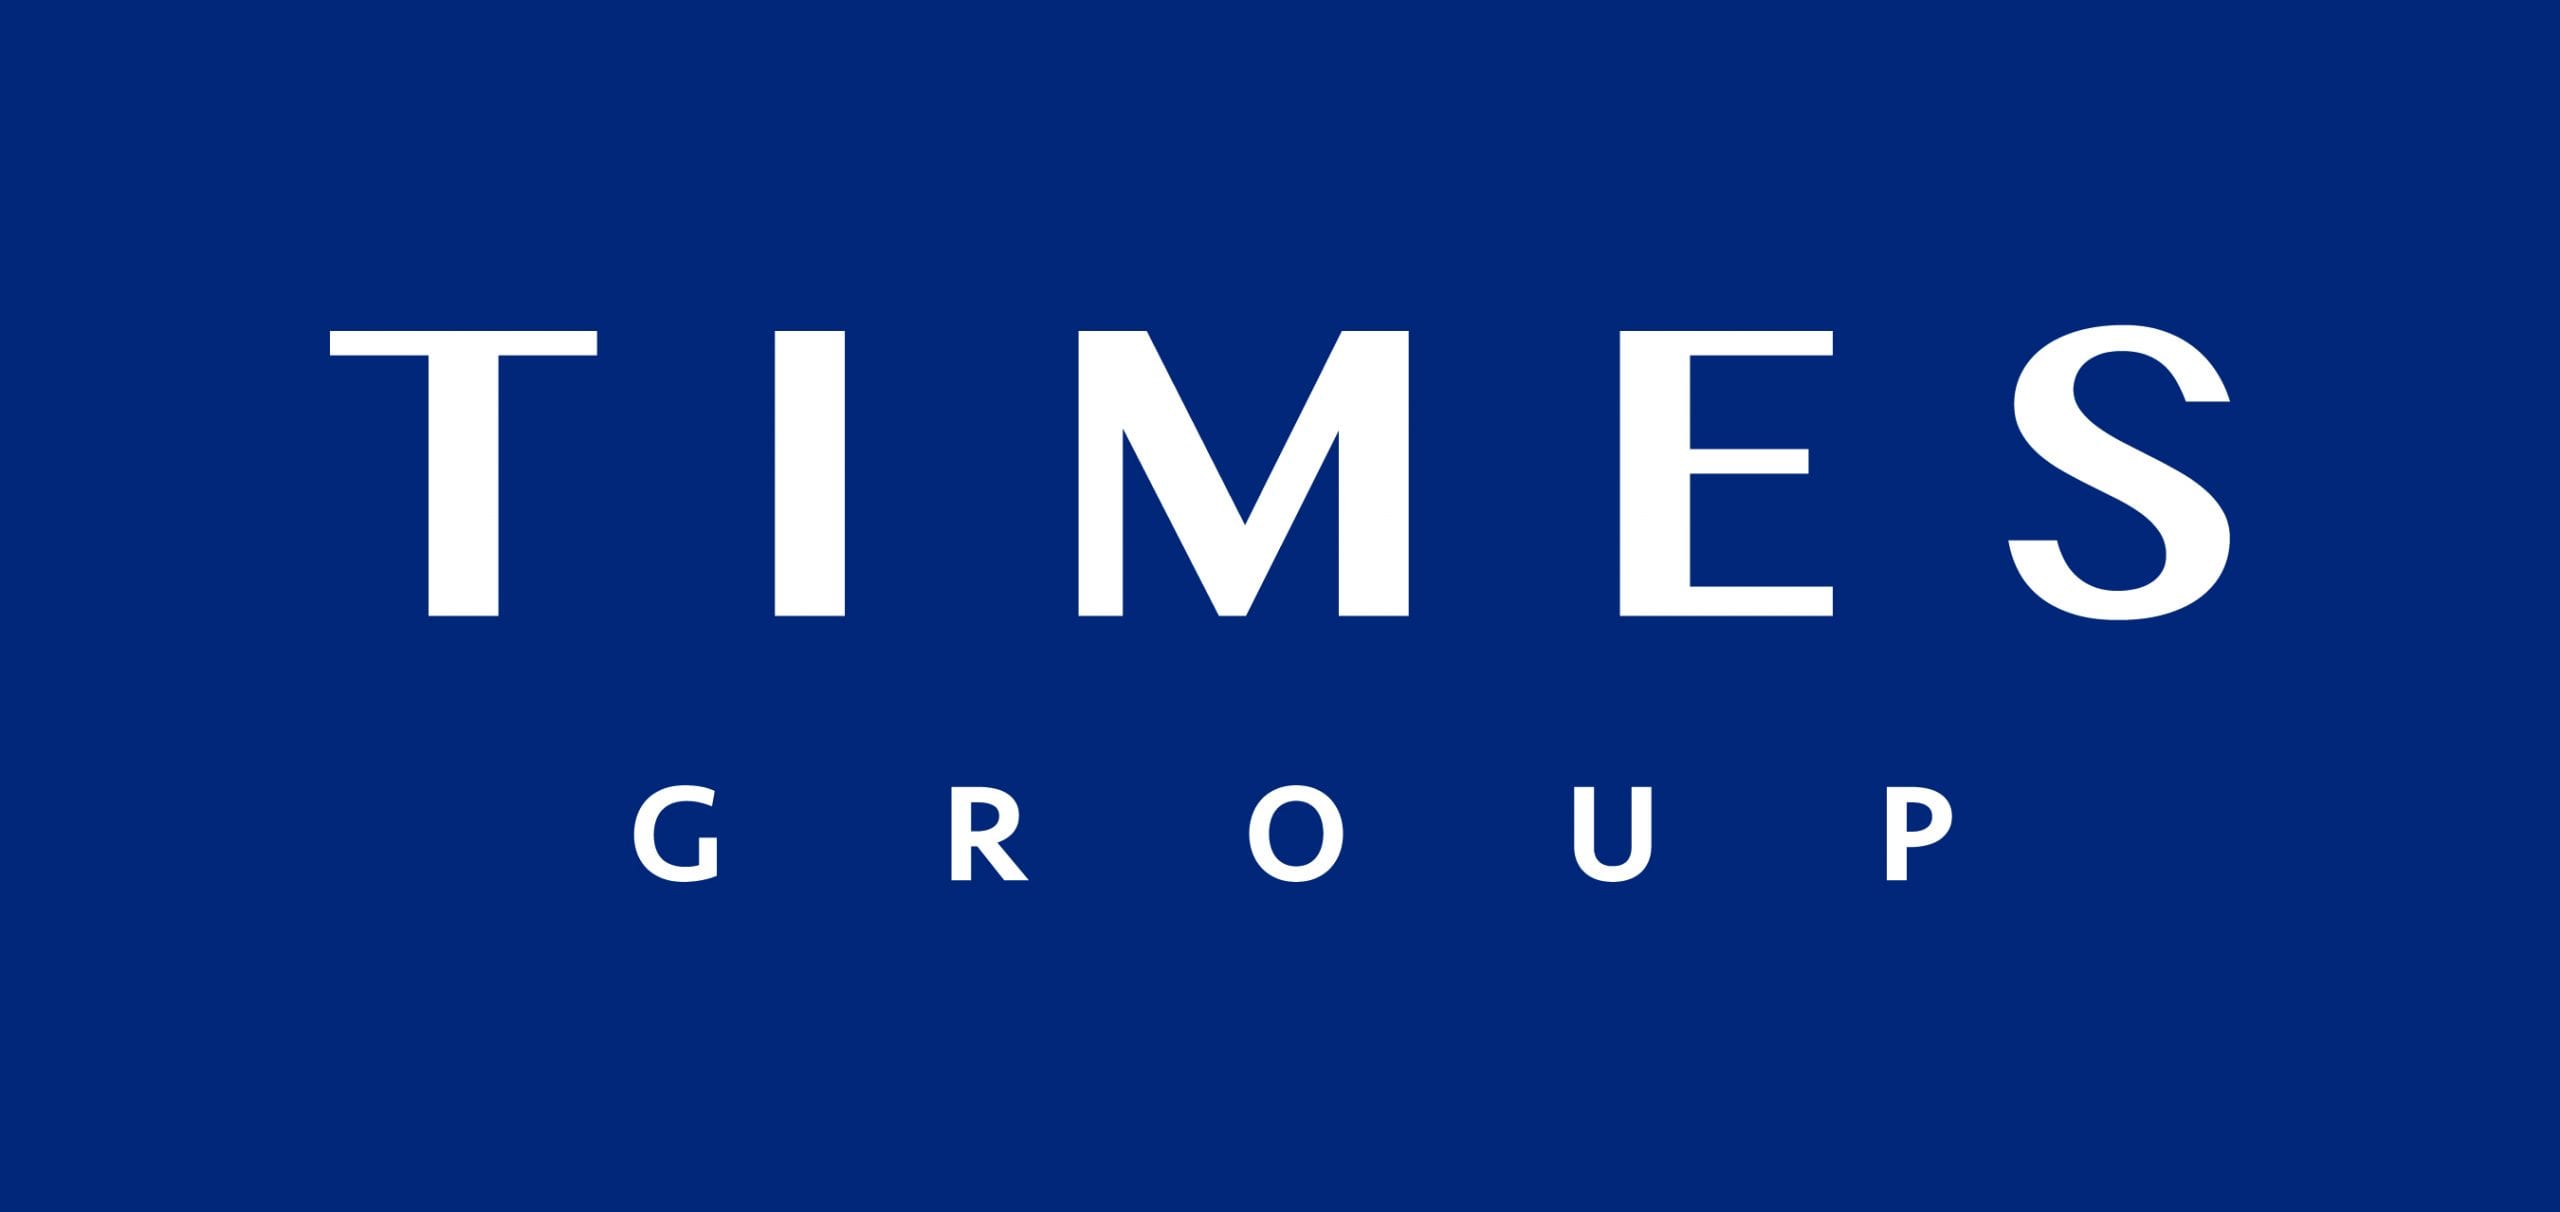 Times Group Word Mark Design 2018_Logo in Blue Background (1)